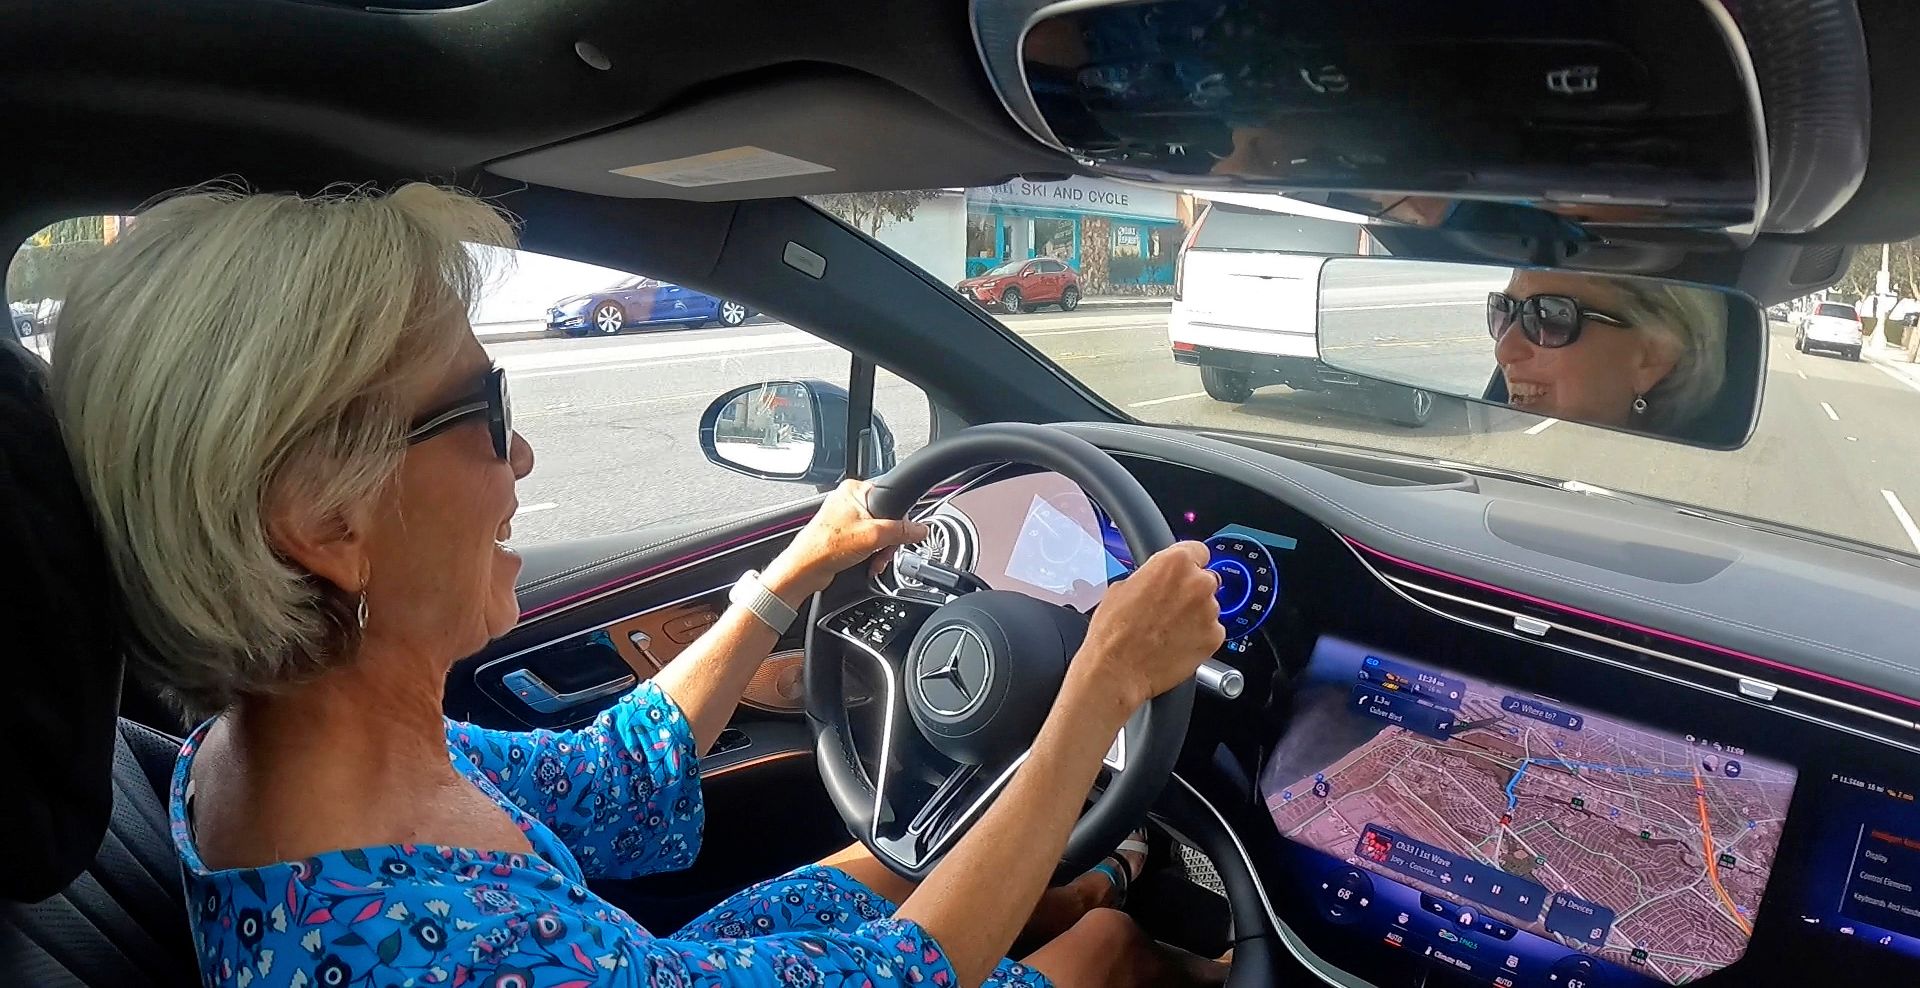 My Happy Place - Driving The All-Electric Mercedes Benz Eqs 450+ . Photo: Ree Bisaccio